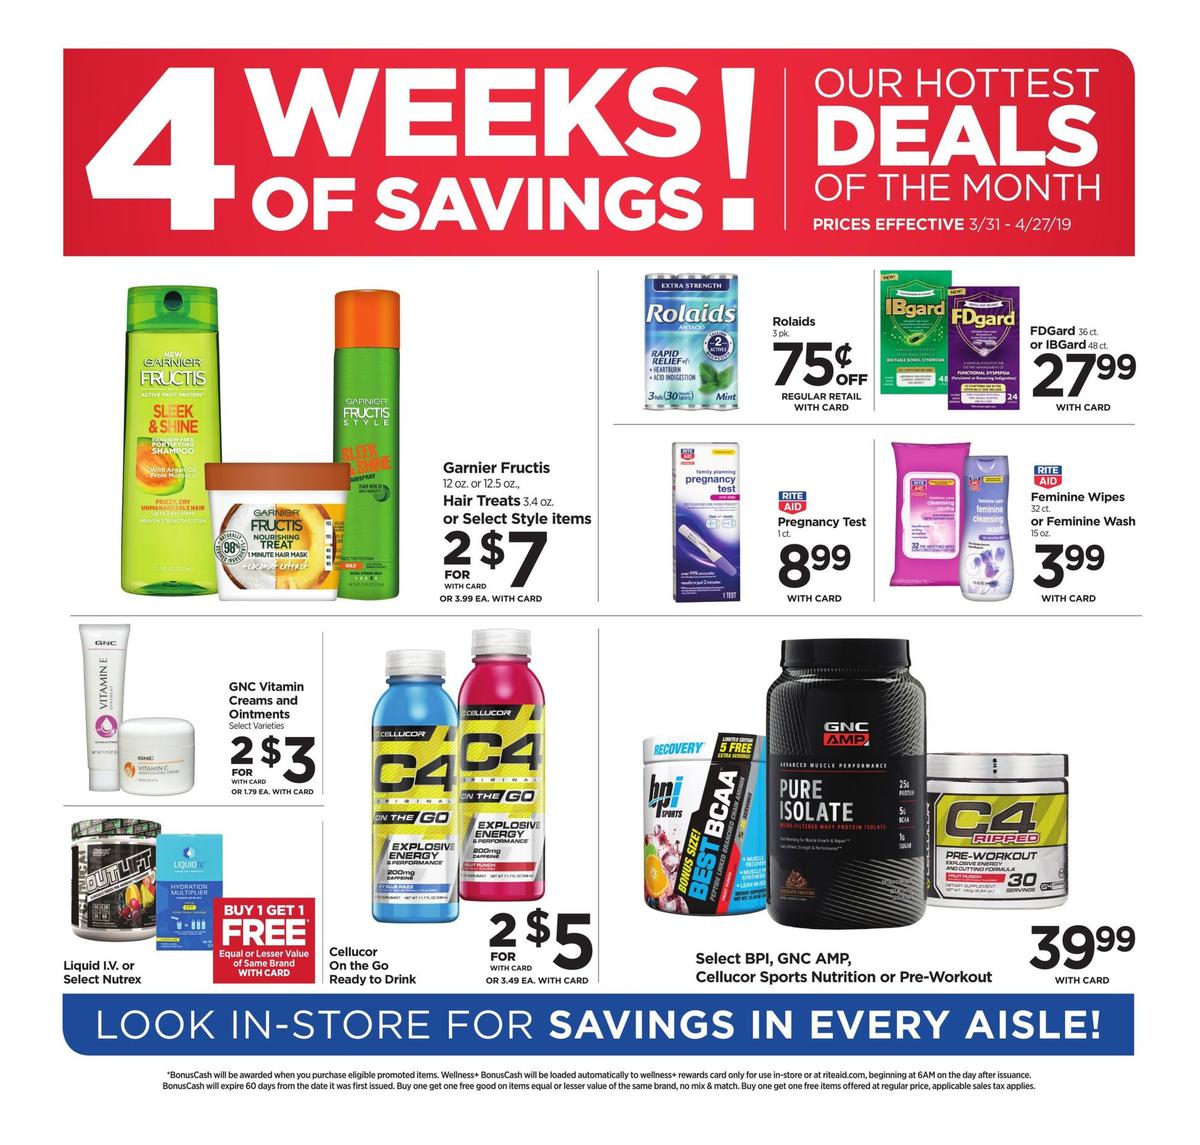 Rite Aid 4 WEEKS Weekly Ad from March 31